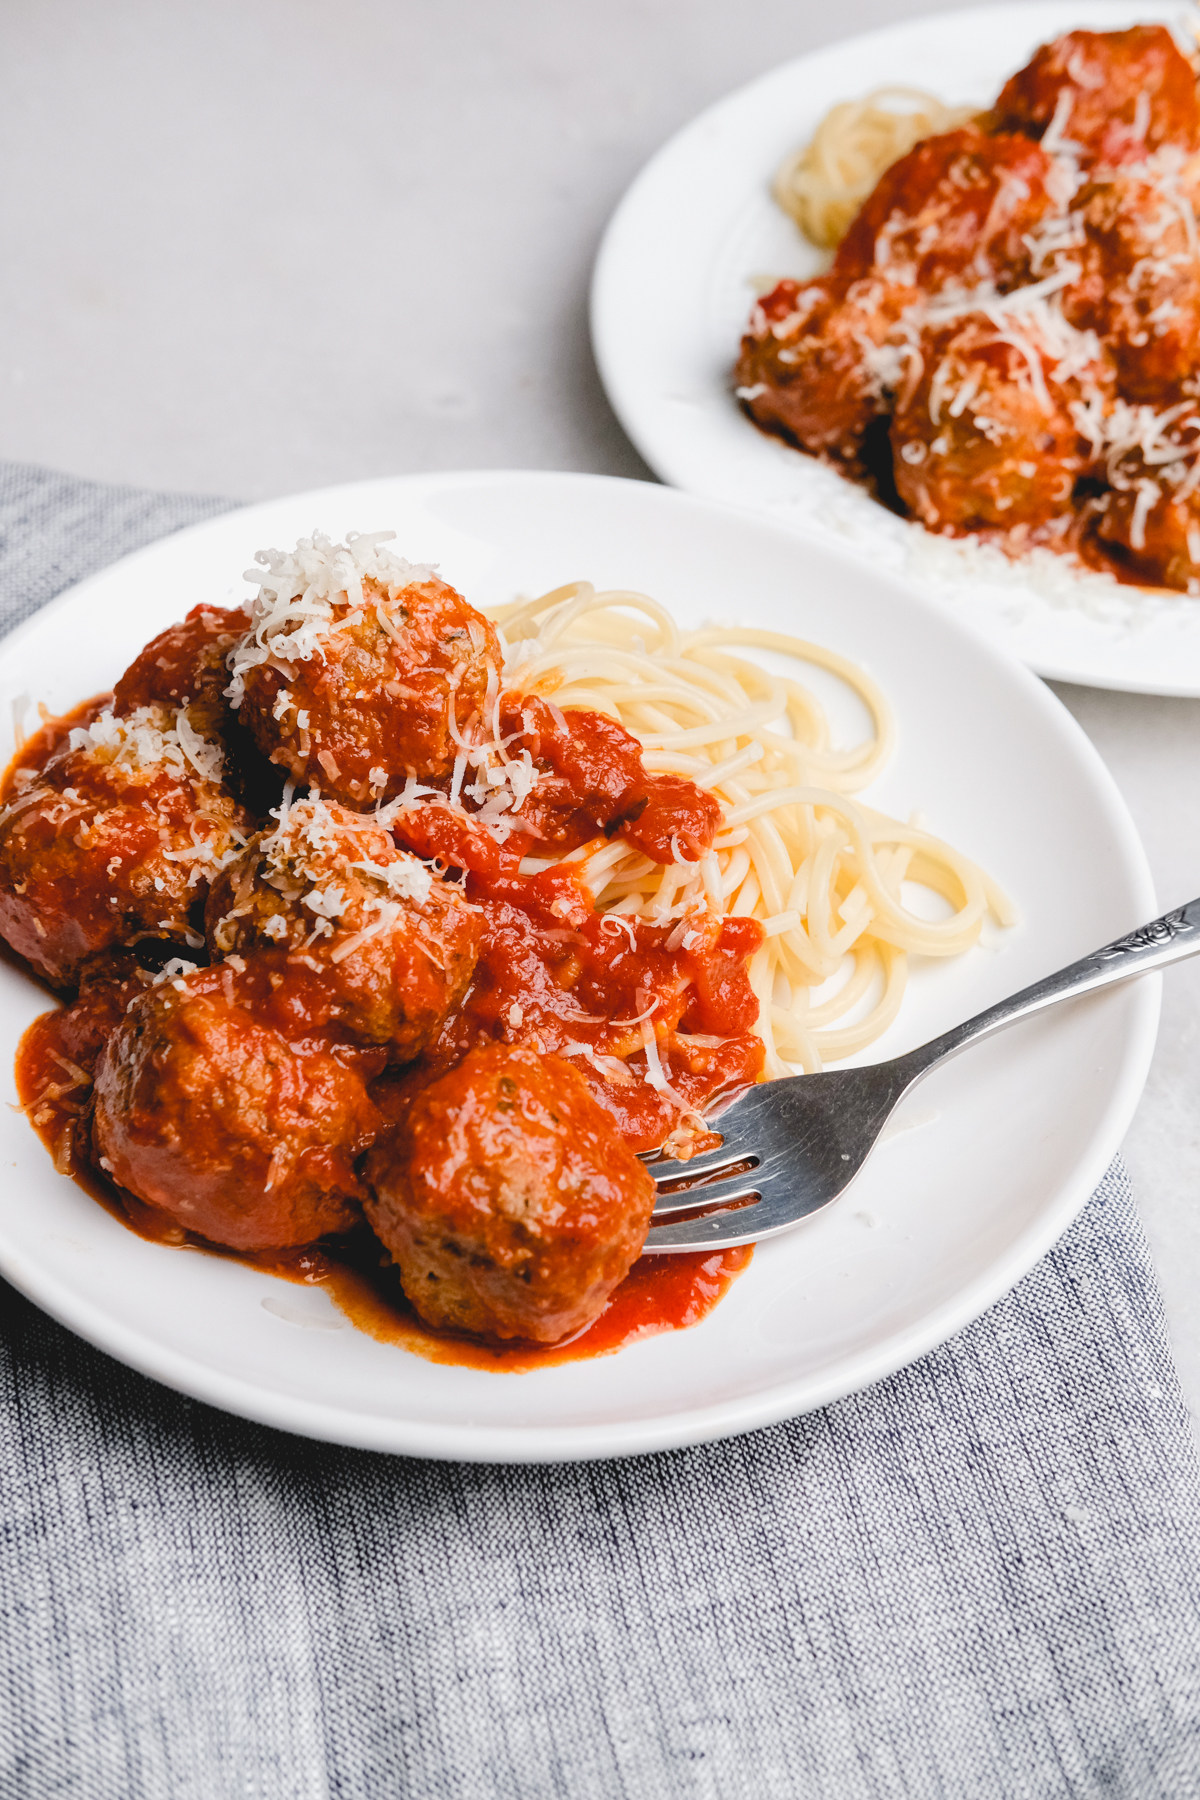 Italian meatballs on a plate with spaghetti and cheese